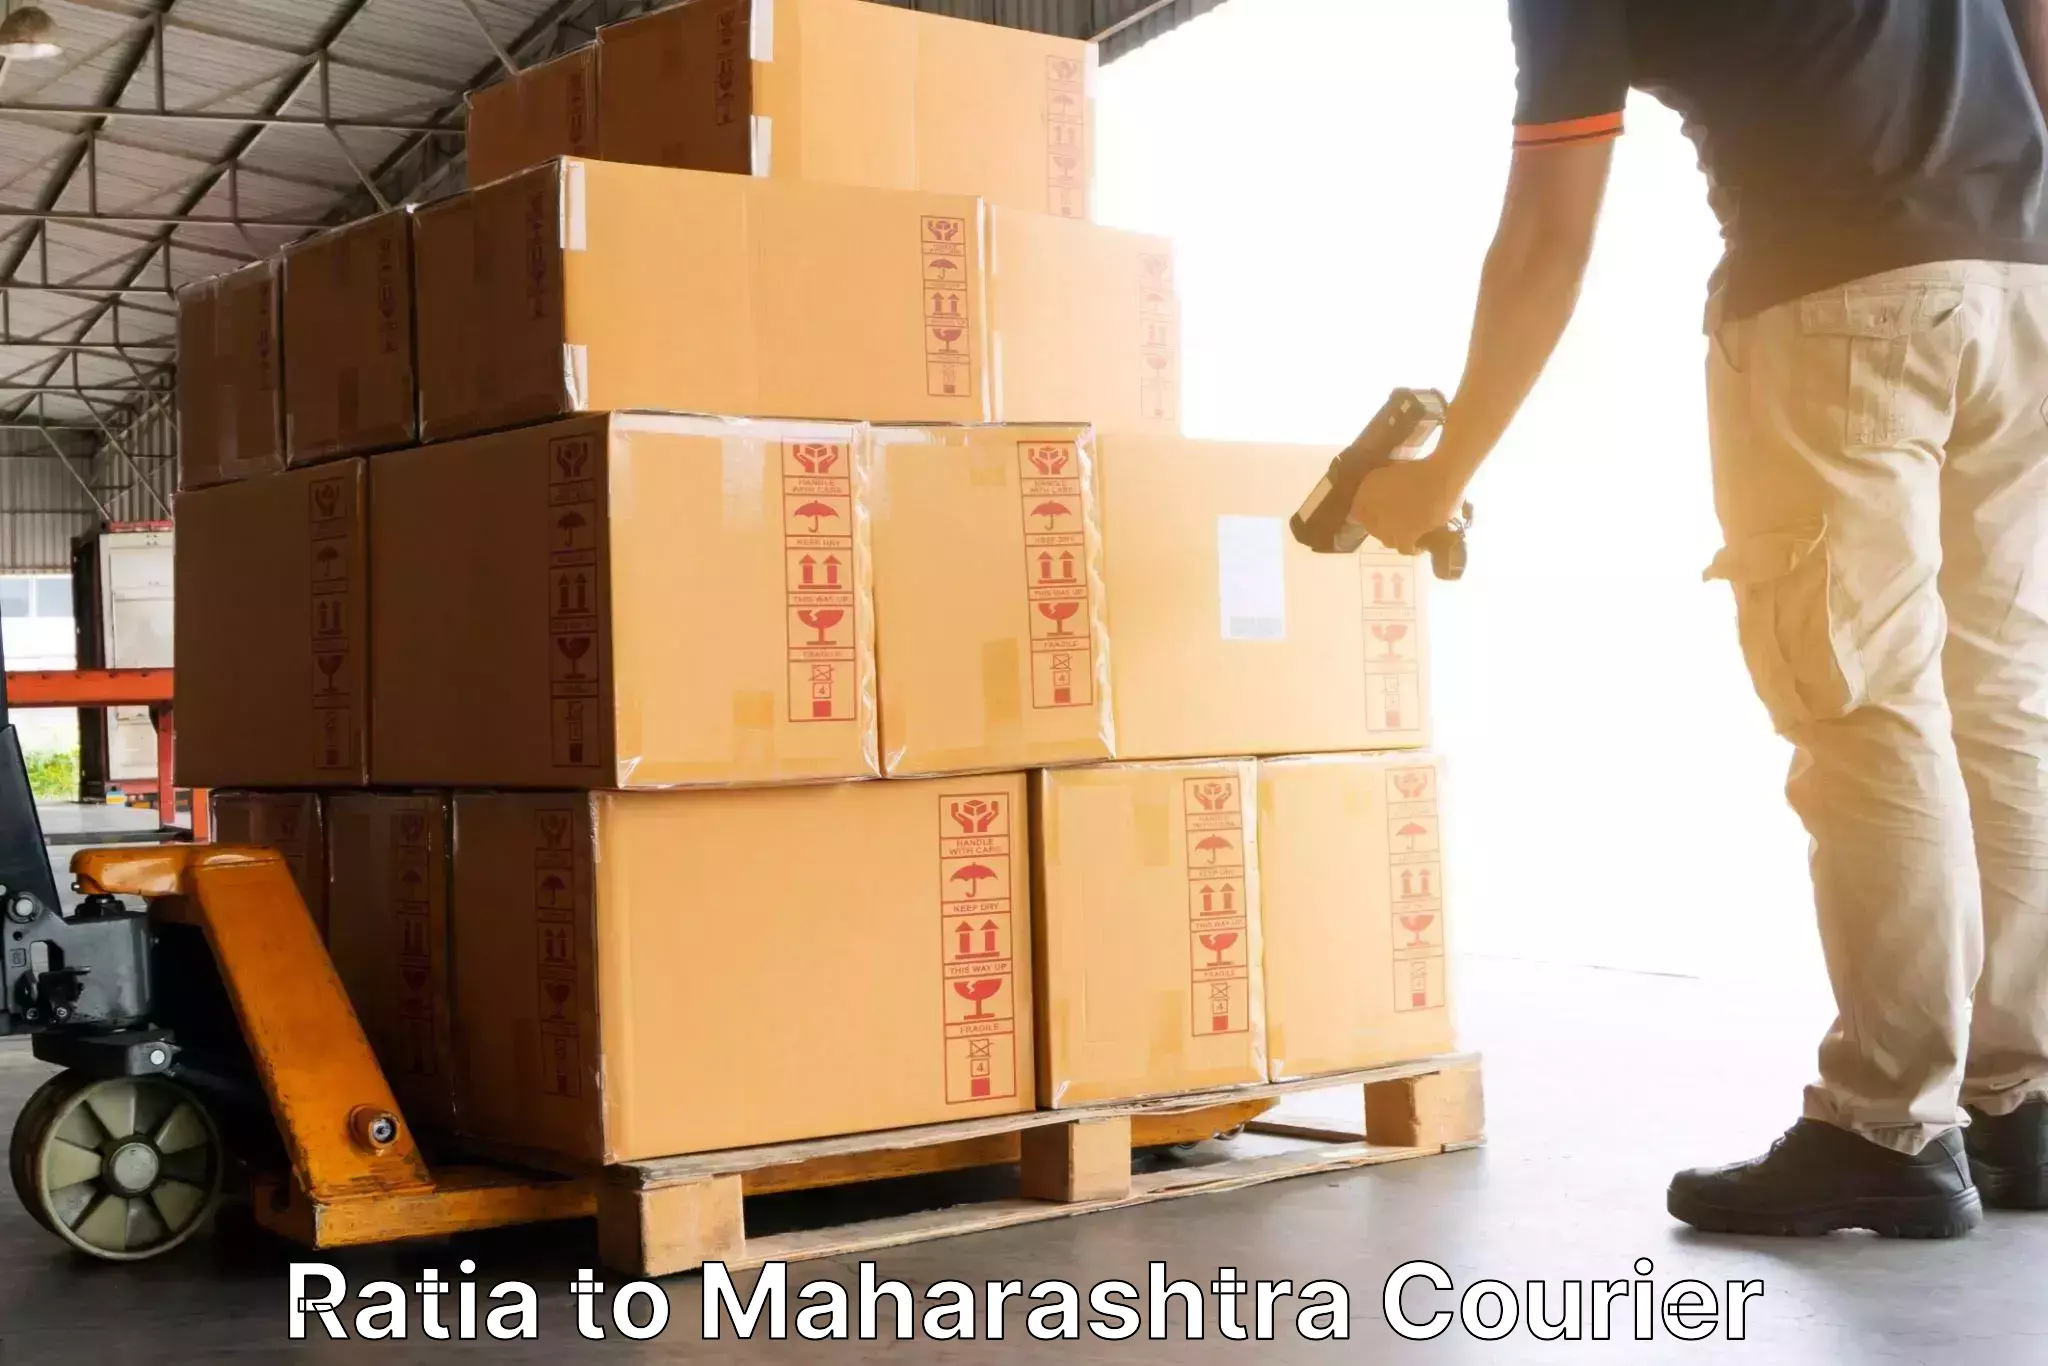 Local courier options in Ratia to Bhandara